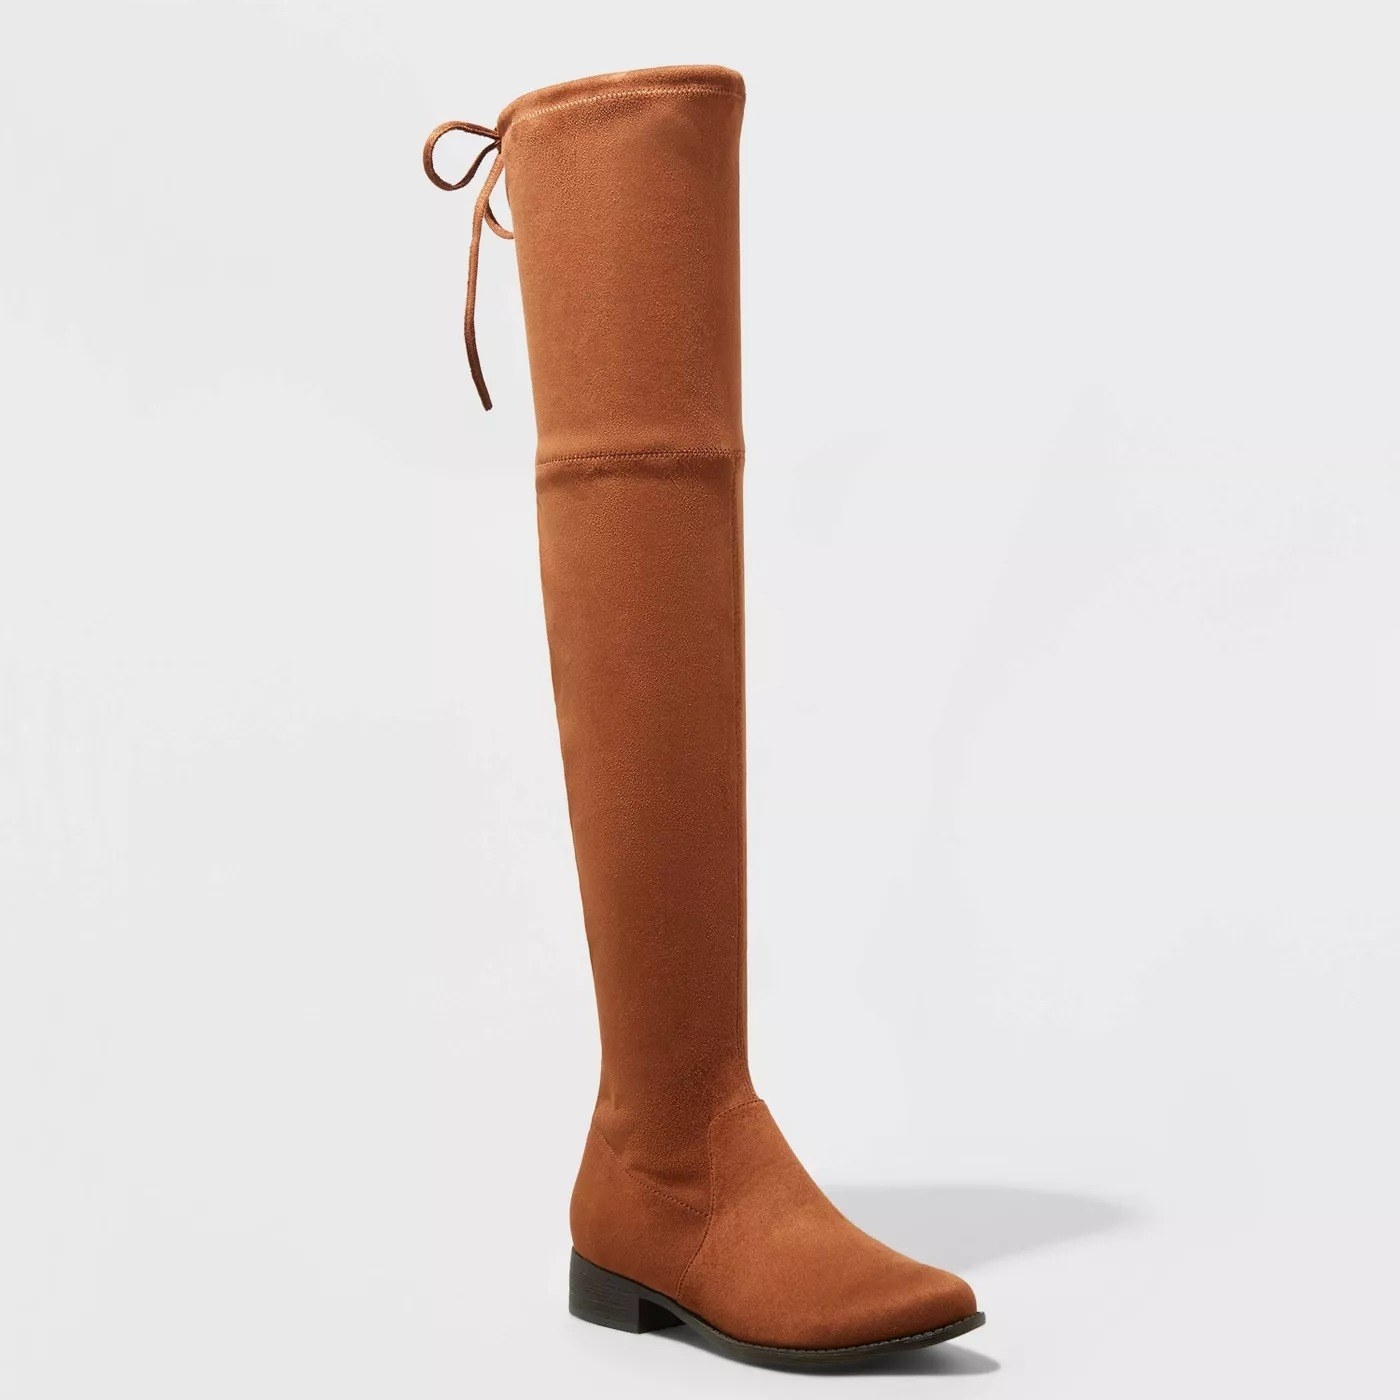 Camel colored boots with black sole, tie string detail at the top of the boot